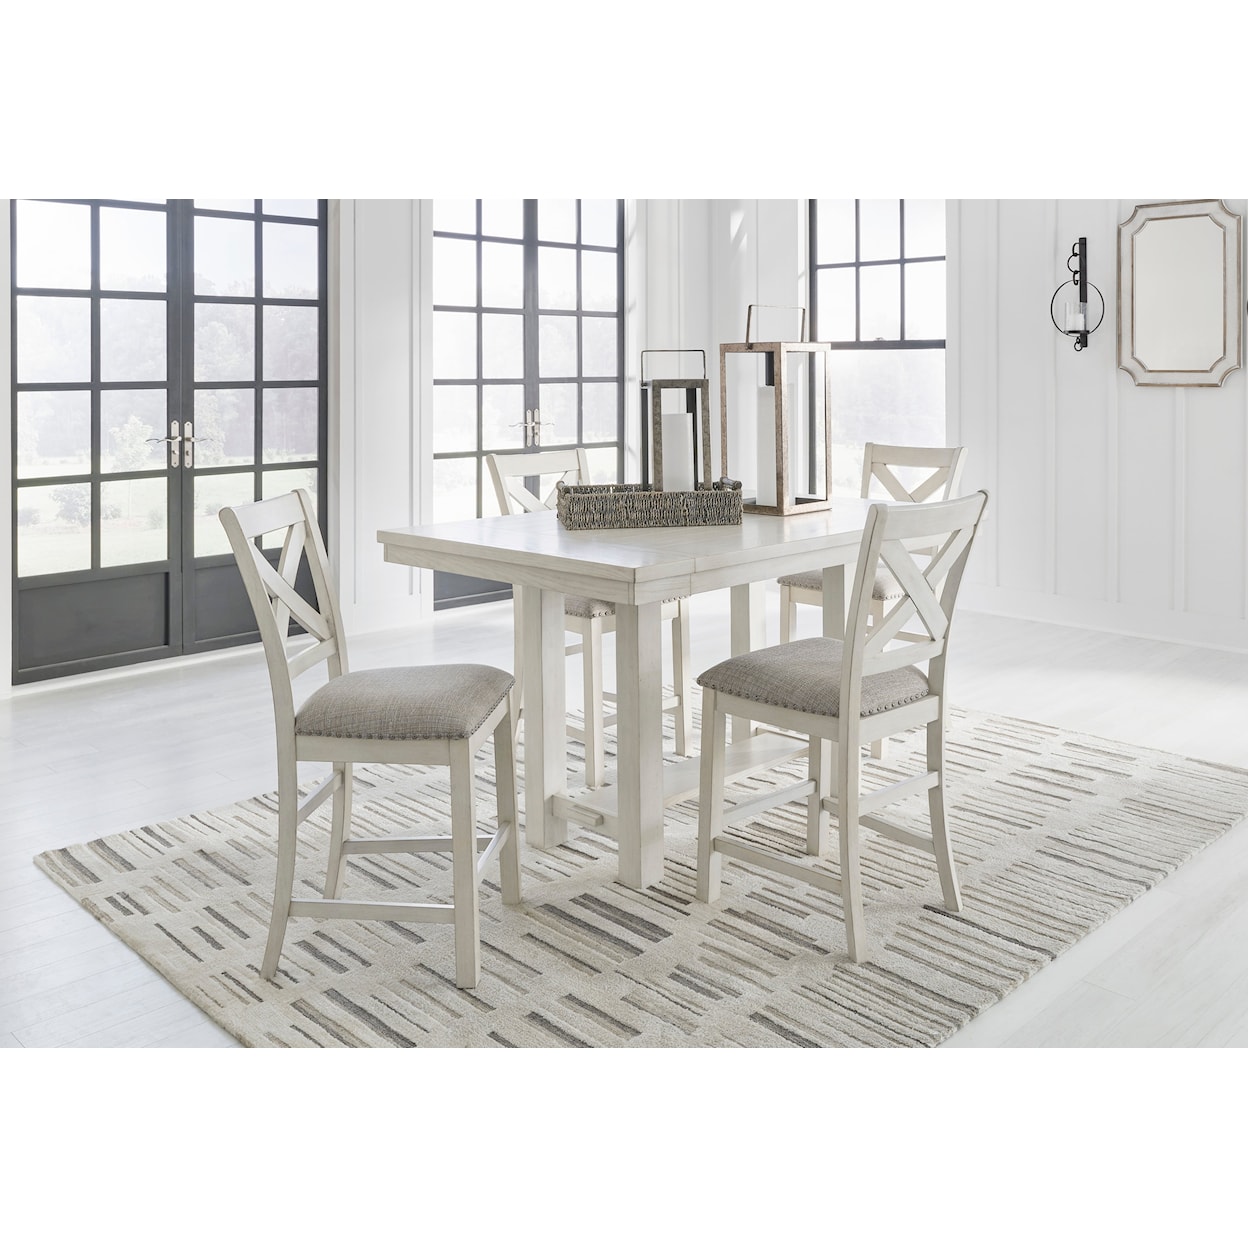 Michael Alan Select Robbinsdale Counter Height Dining Table And 4 Barstools